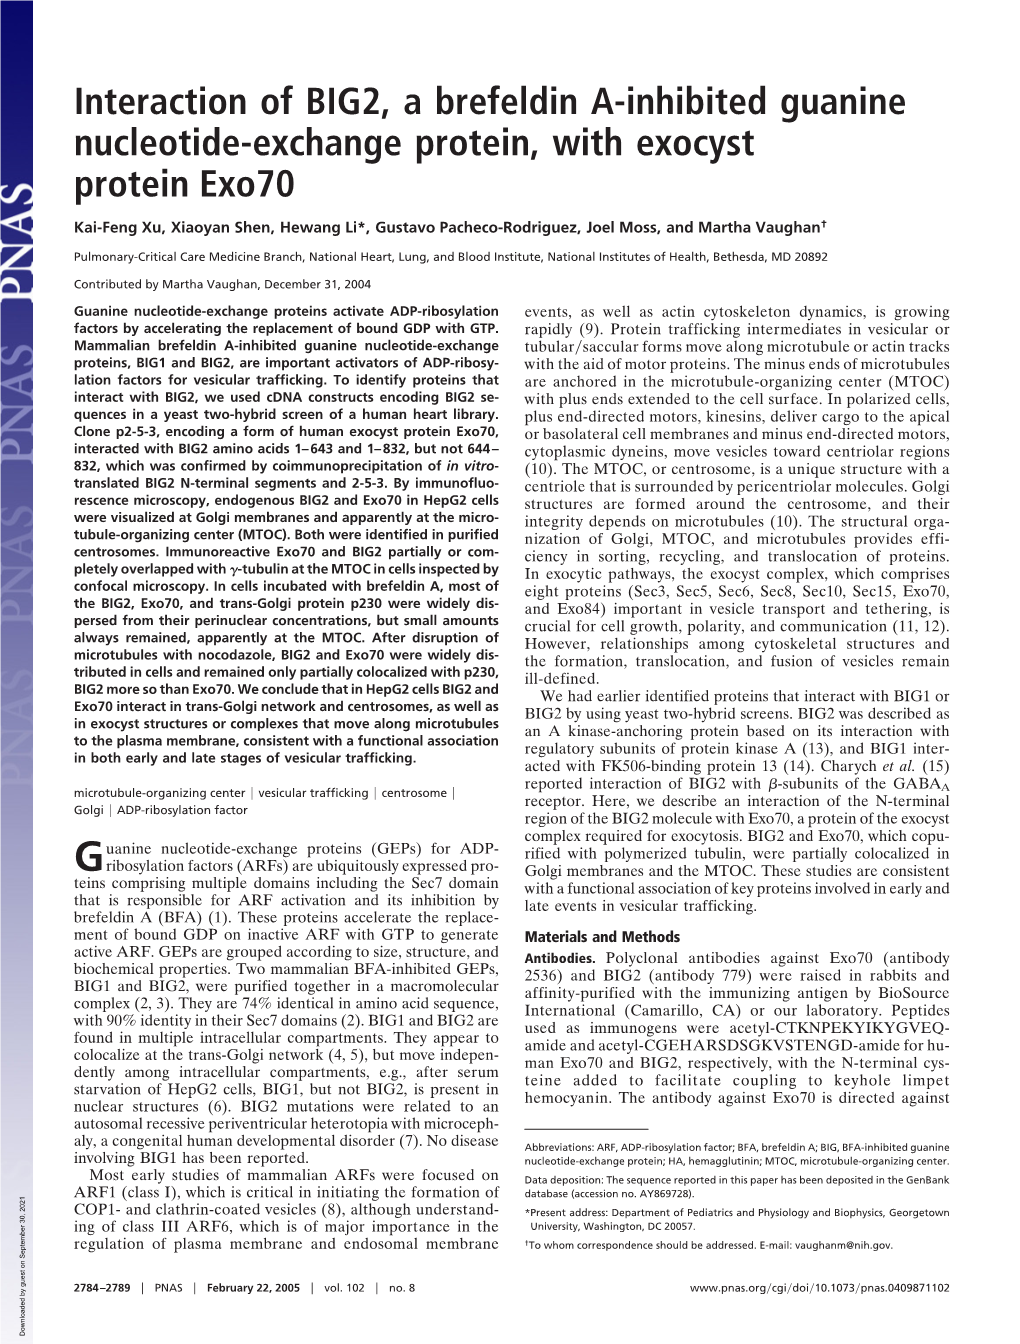 Interaction of BIG2, a Brefeldin A-Inhibited Guanine Nucleotide-Exchange Protein, with Exocyst Protein Exo70